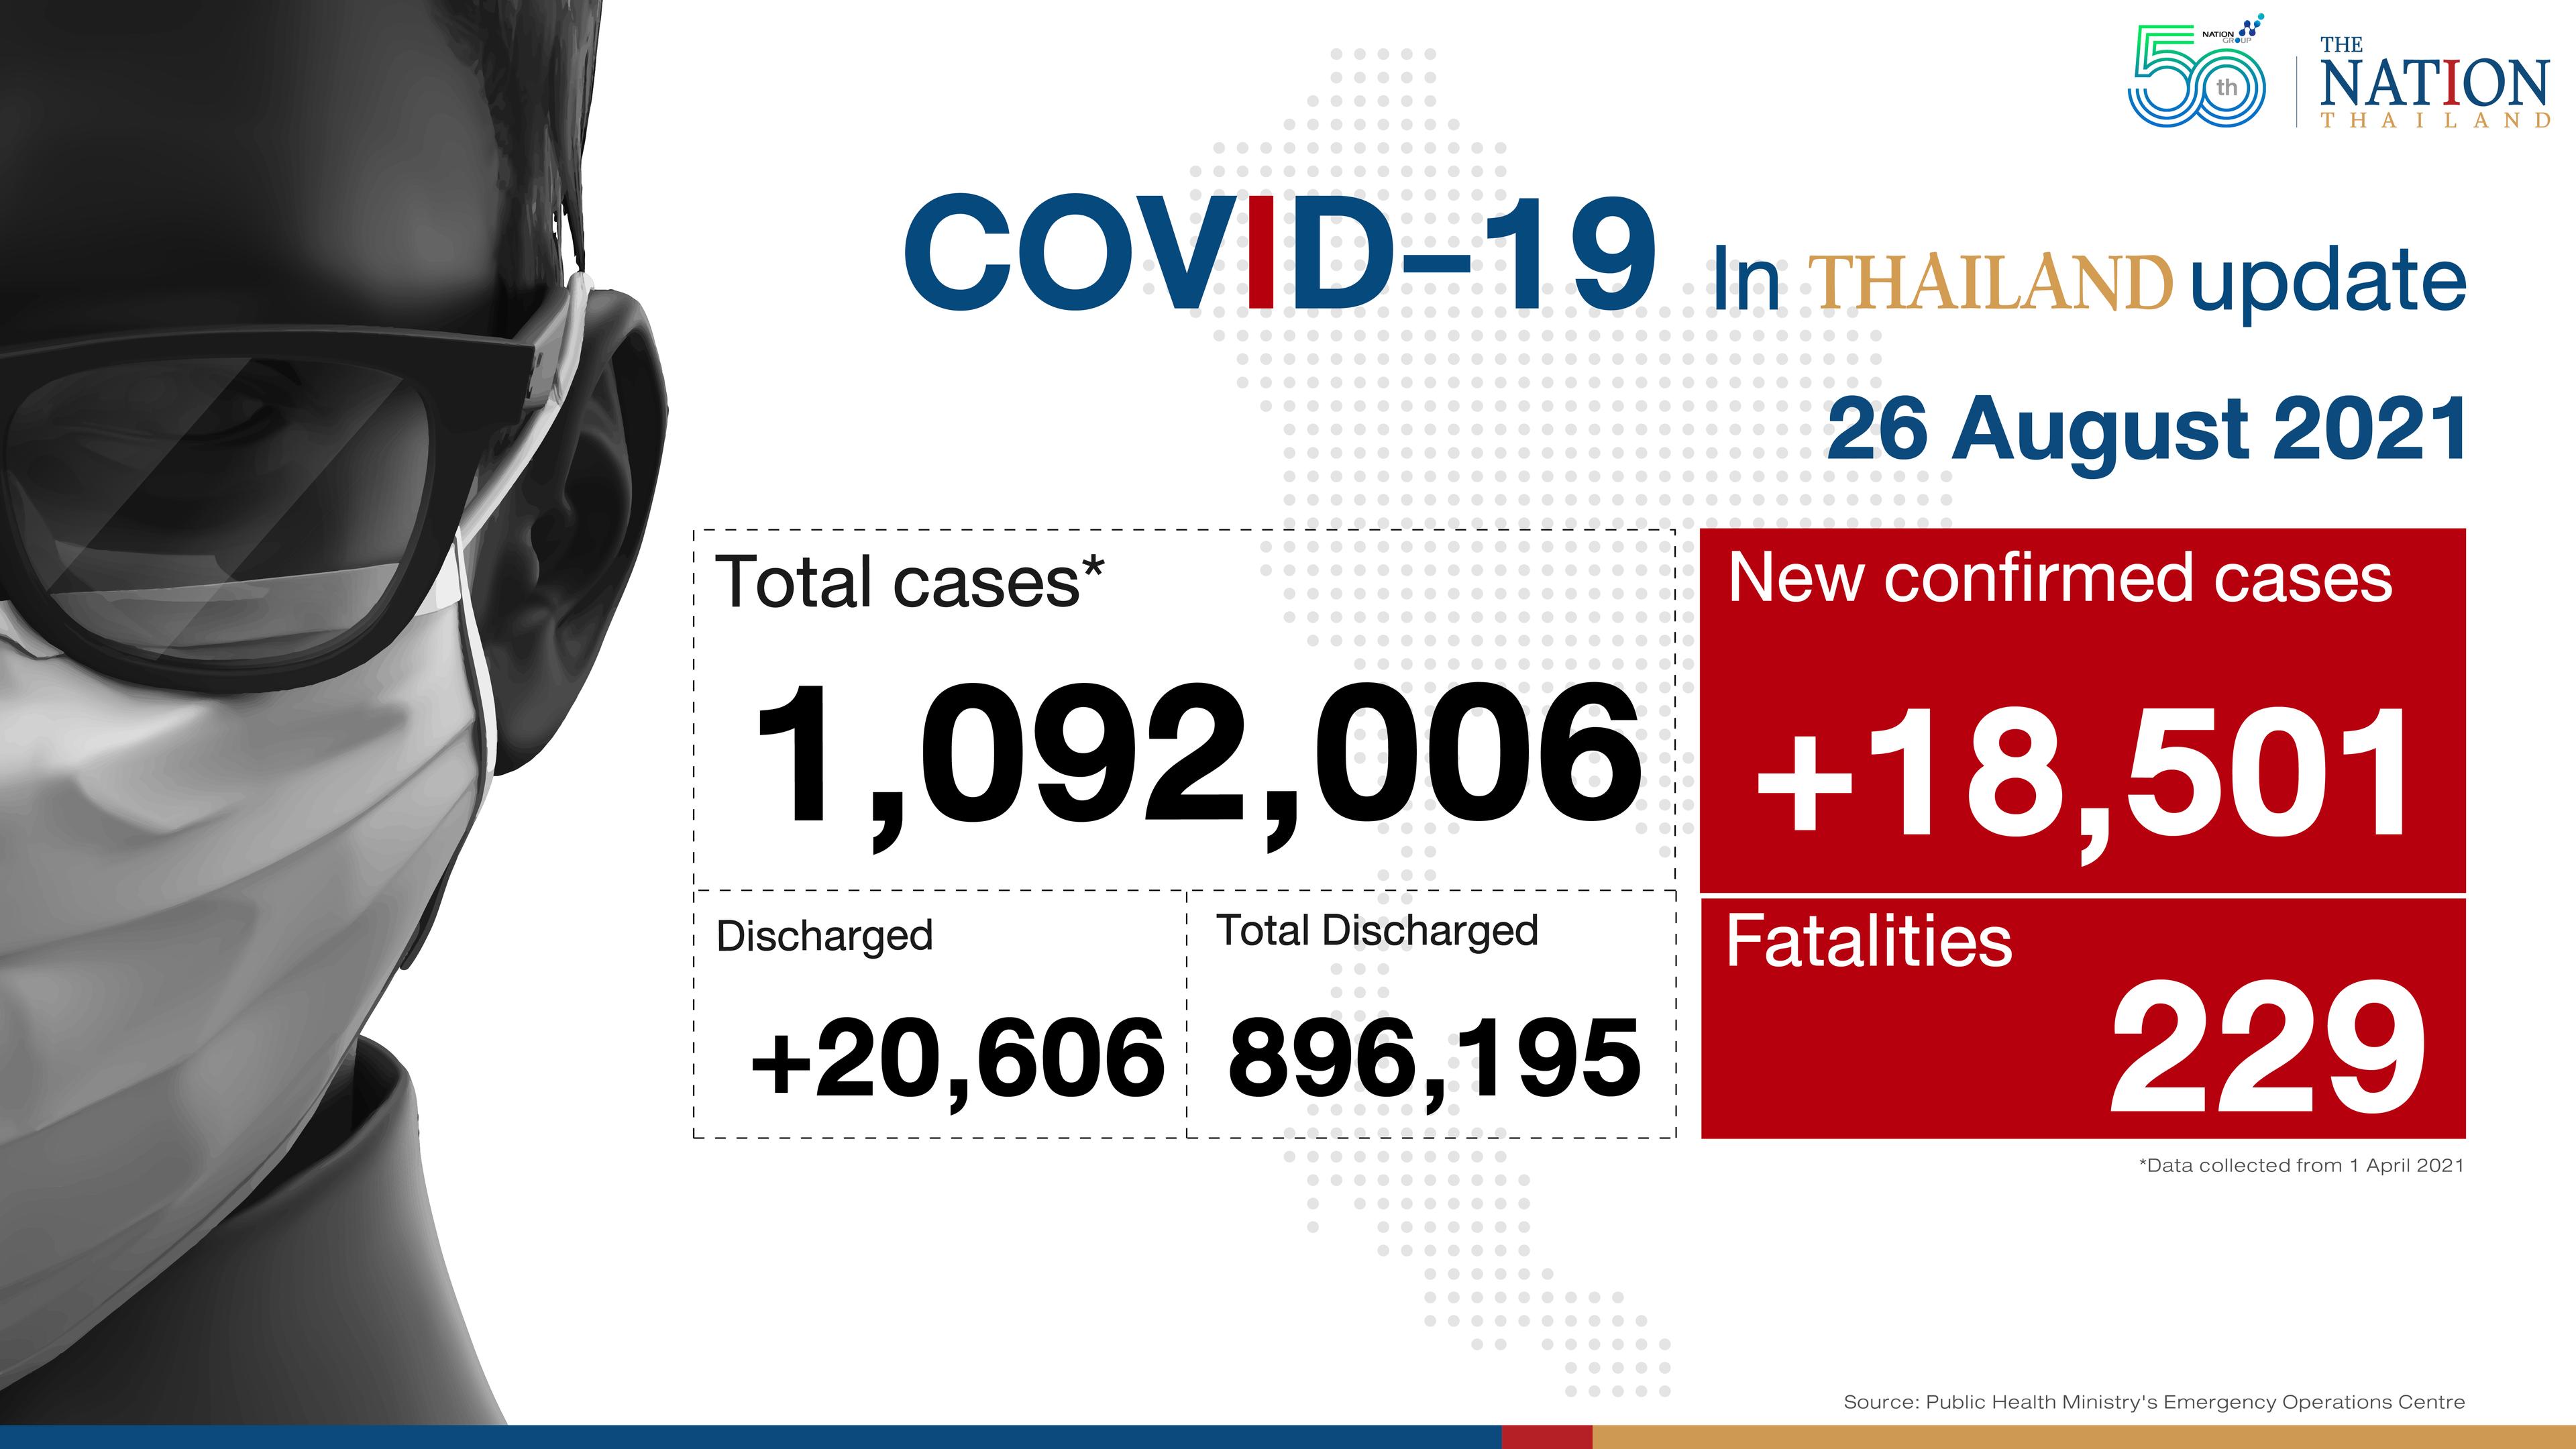 Thailand recorded 18,501 Covid-19 cases and 229 deaths on Thursday